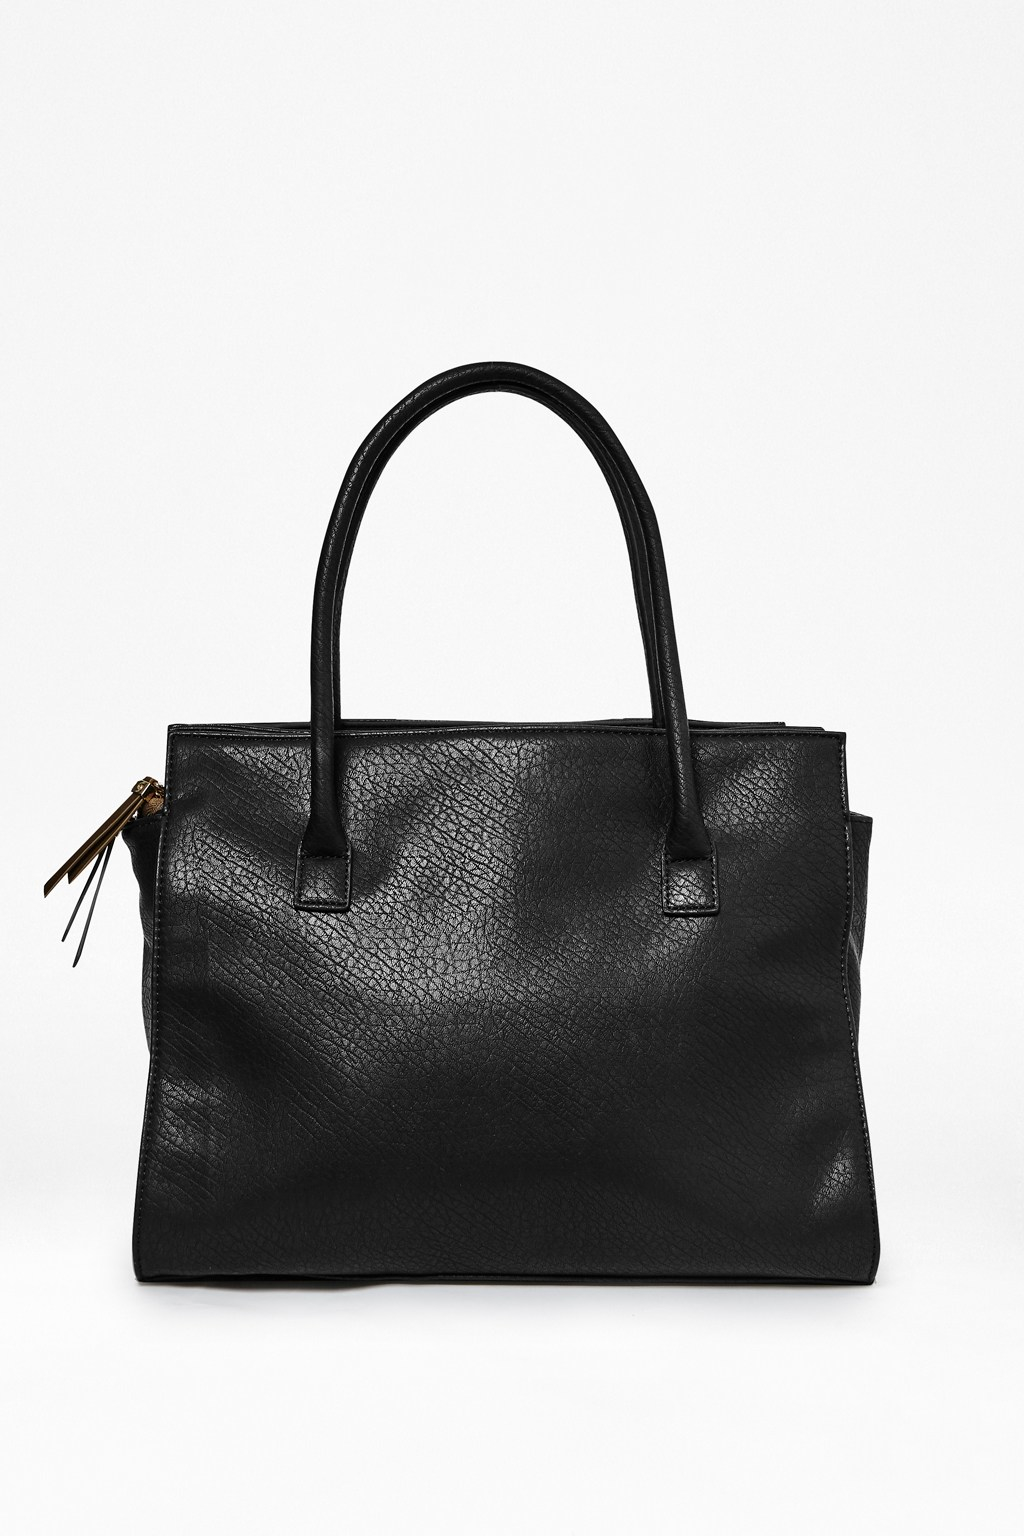 Lyst - French Connection Fiona Tote Bag in Black